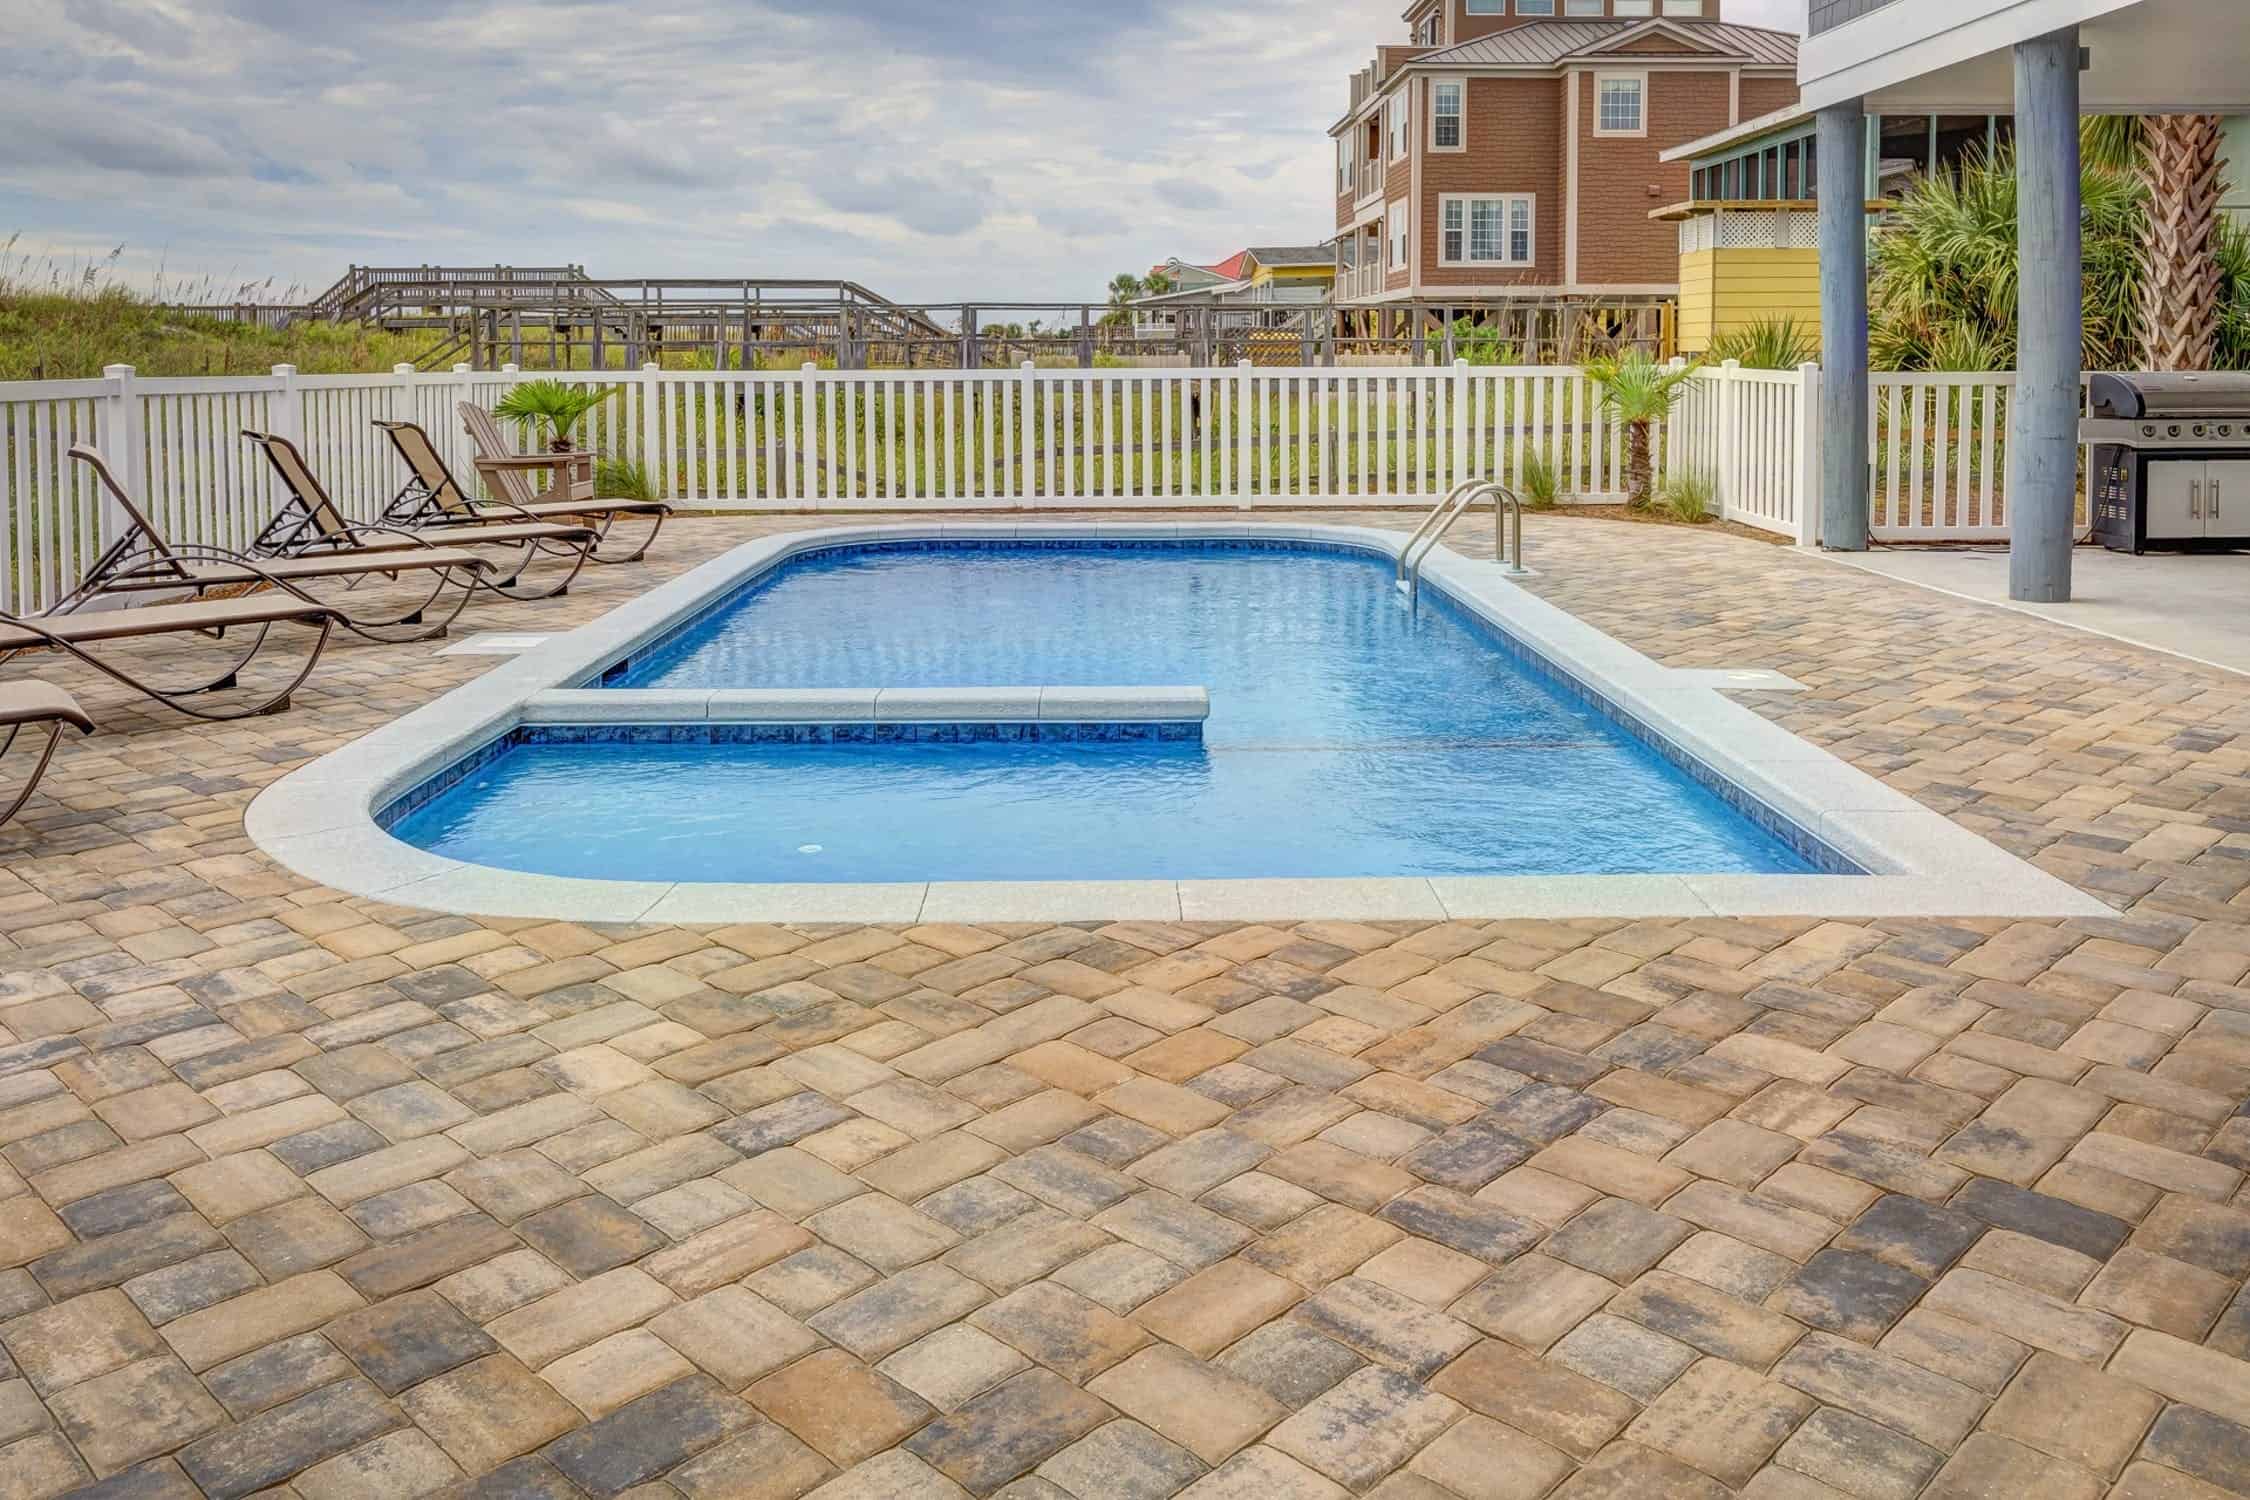 Stamped Concrete or Pavers — Which For Your Patio?